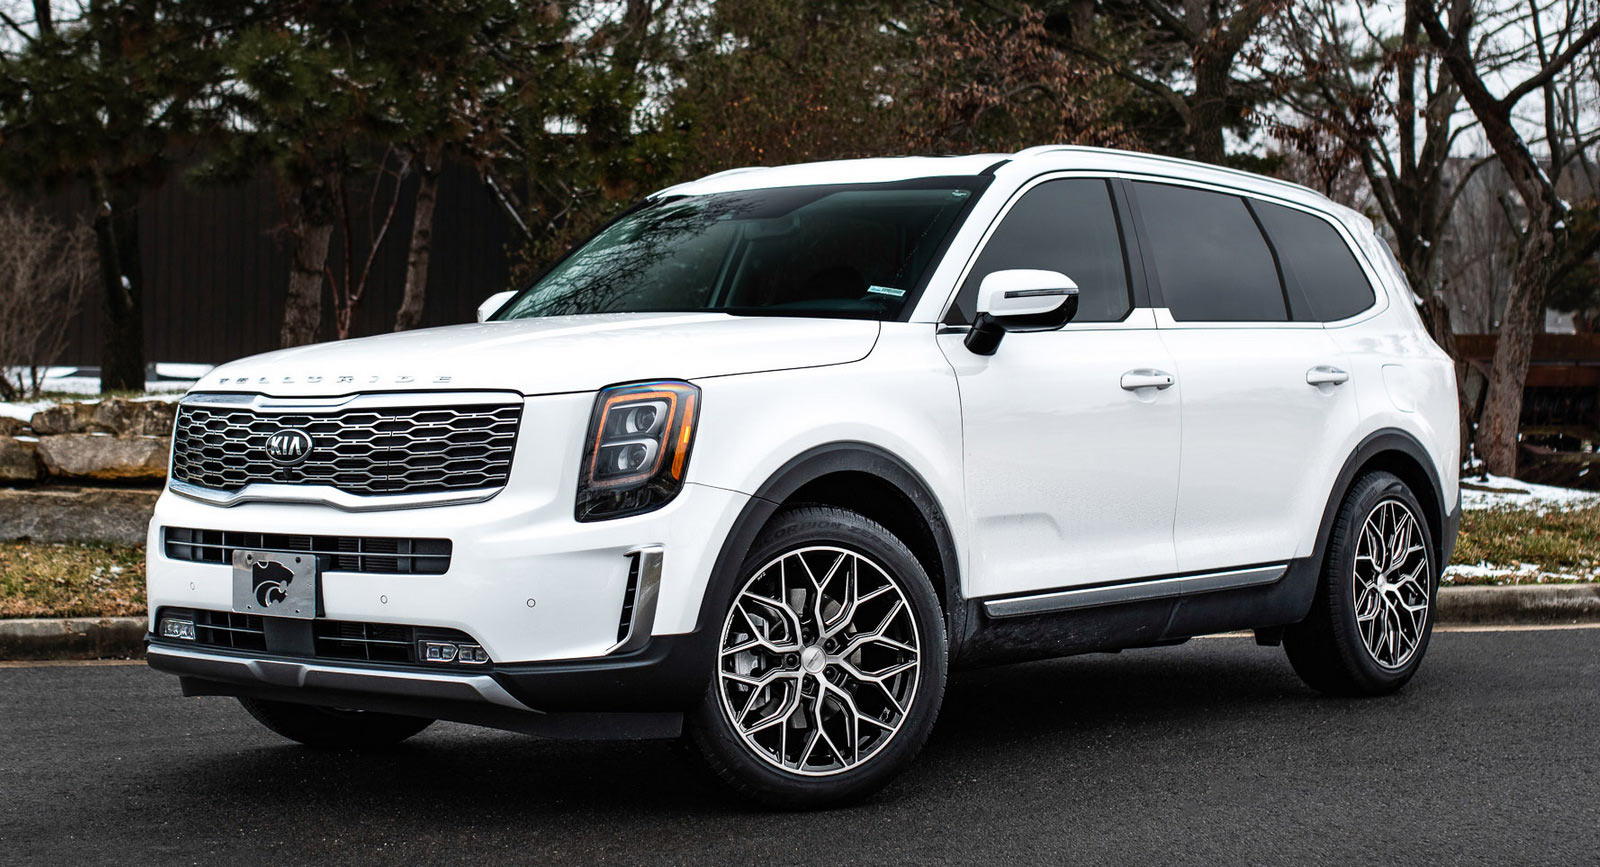 This 2020 Kia Telluride was fitted with a set of Vossen HF-2 wheels in brus...